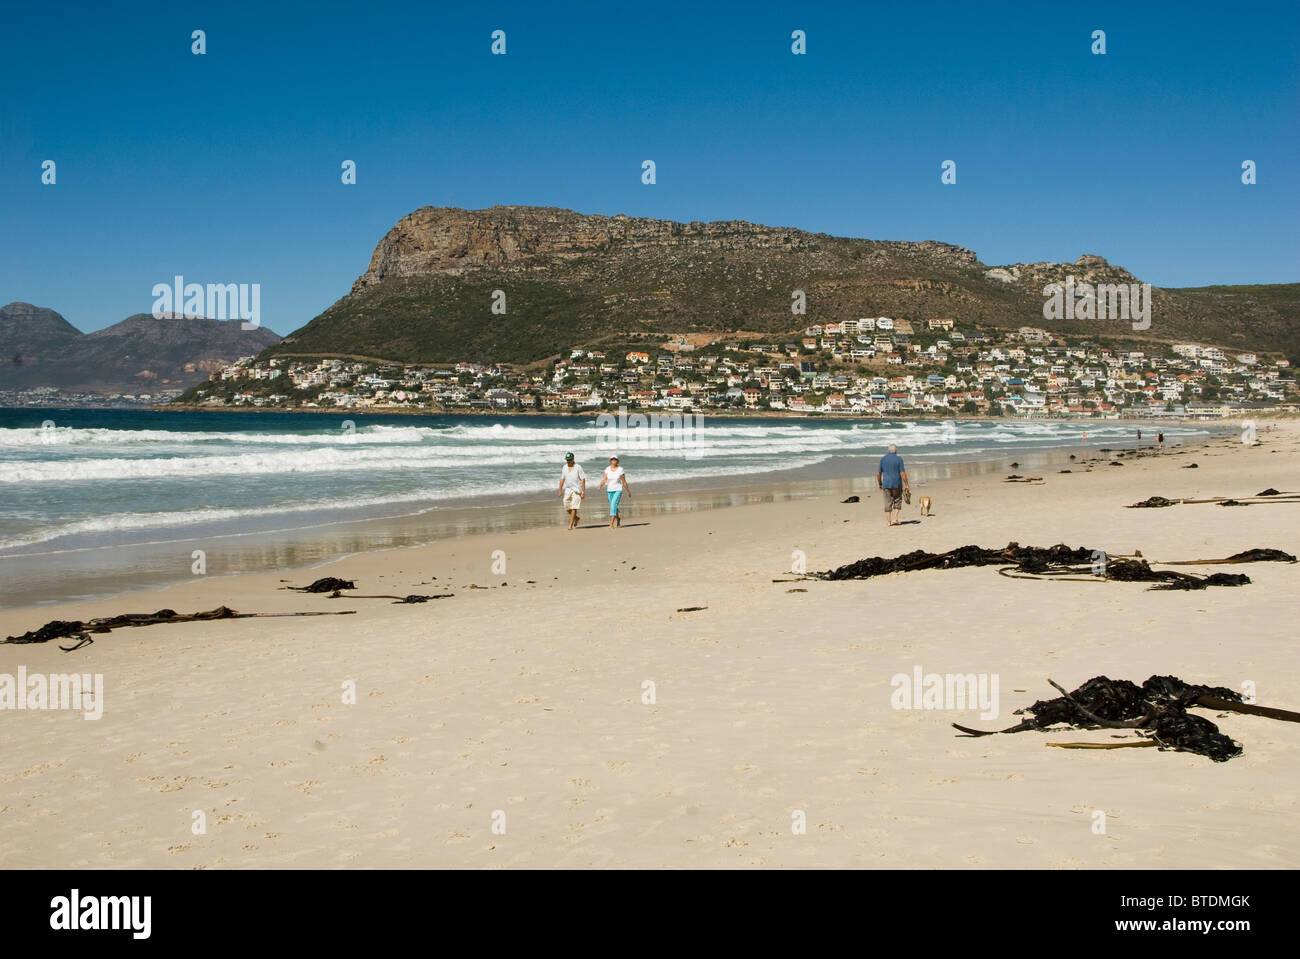 Clovelly beach with a view of hilltops in the background Stock Photo